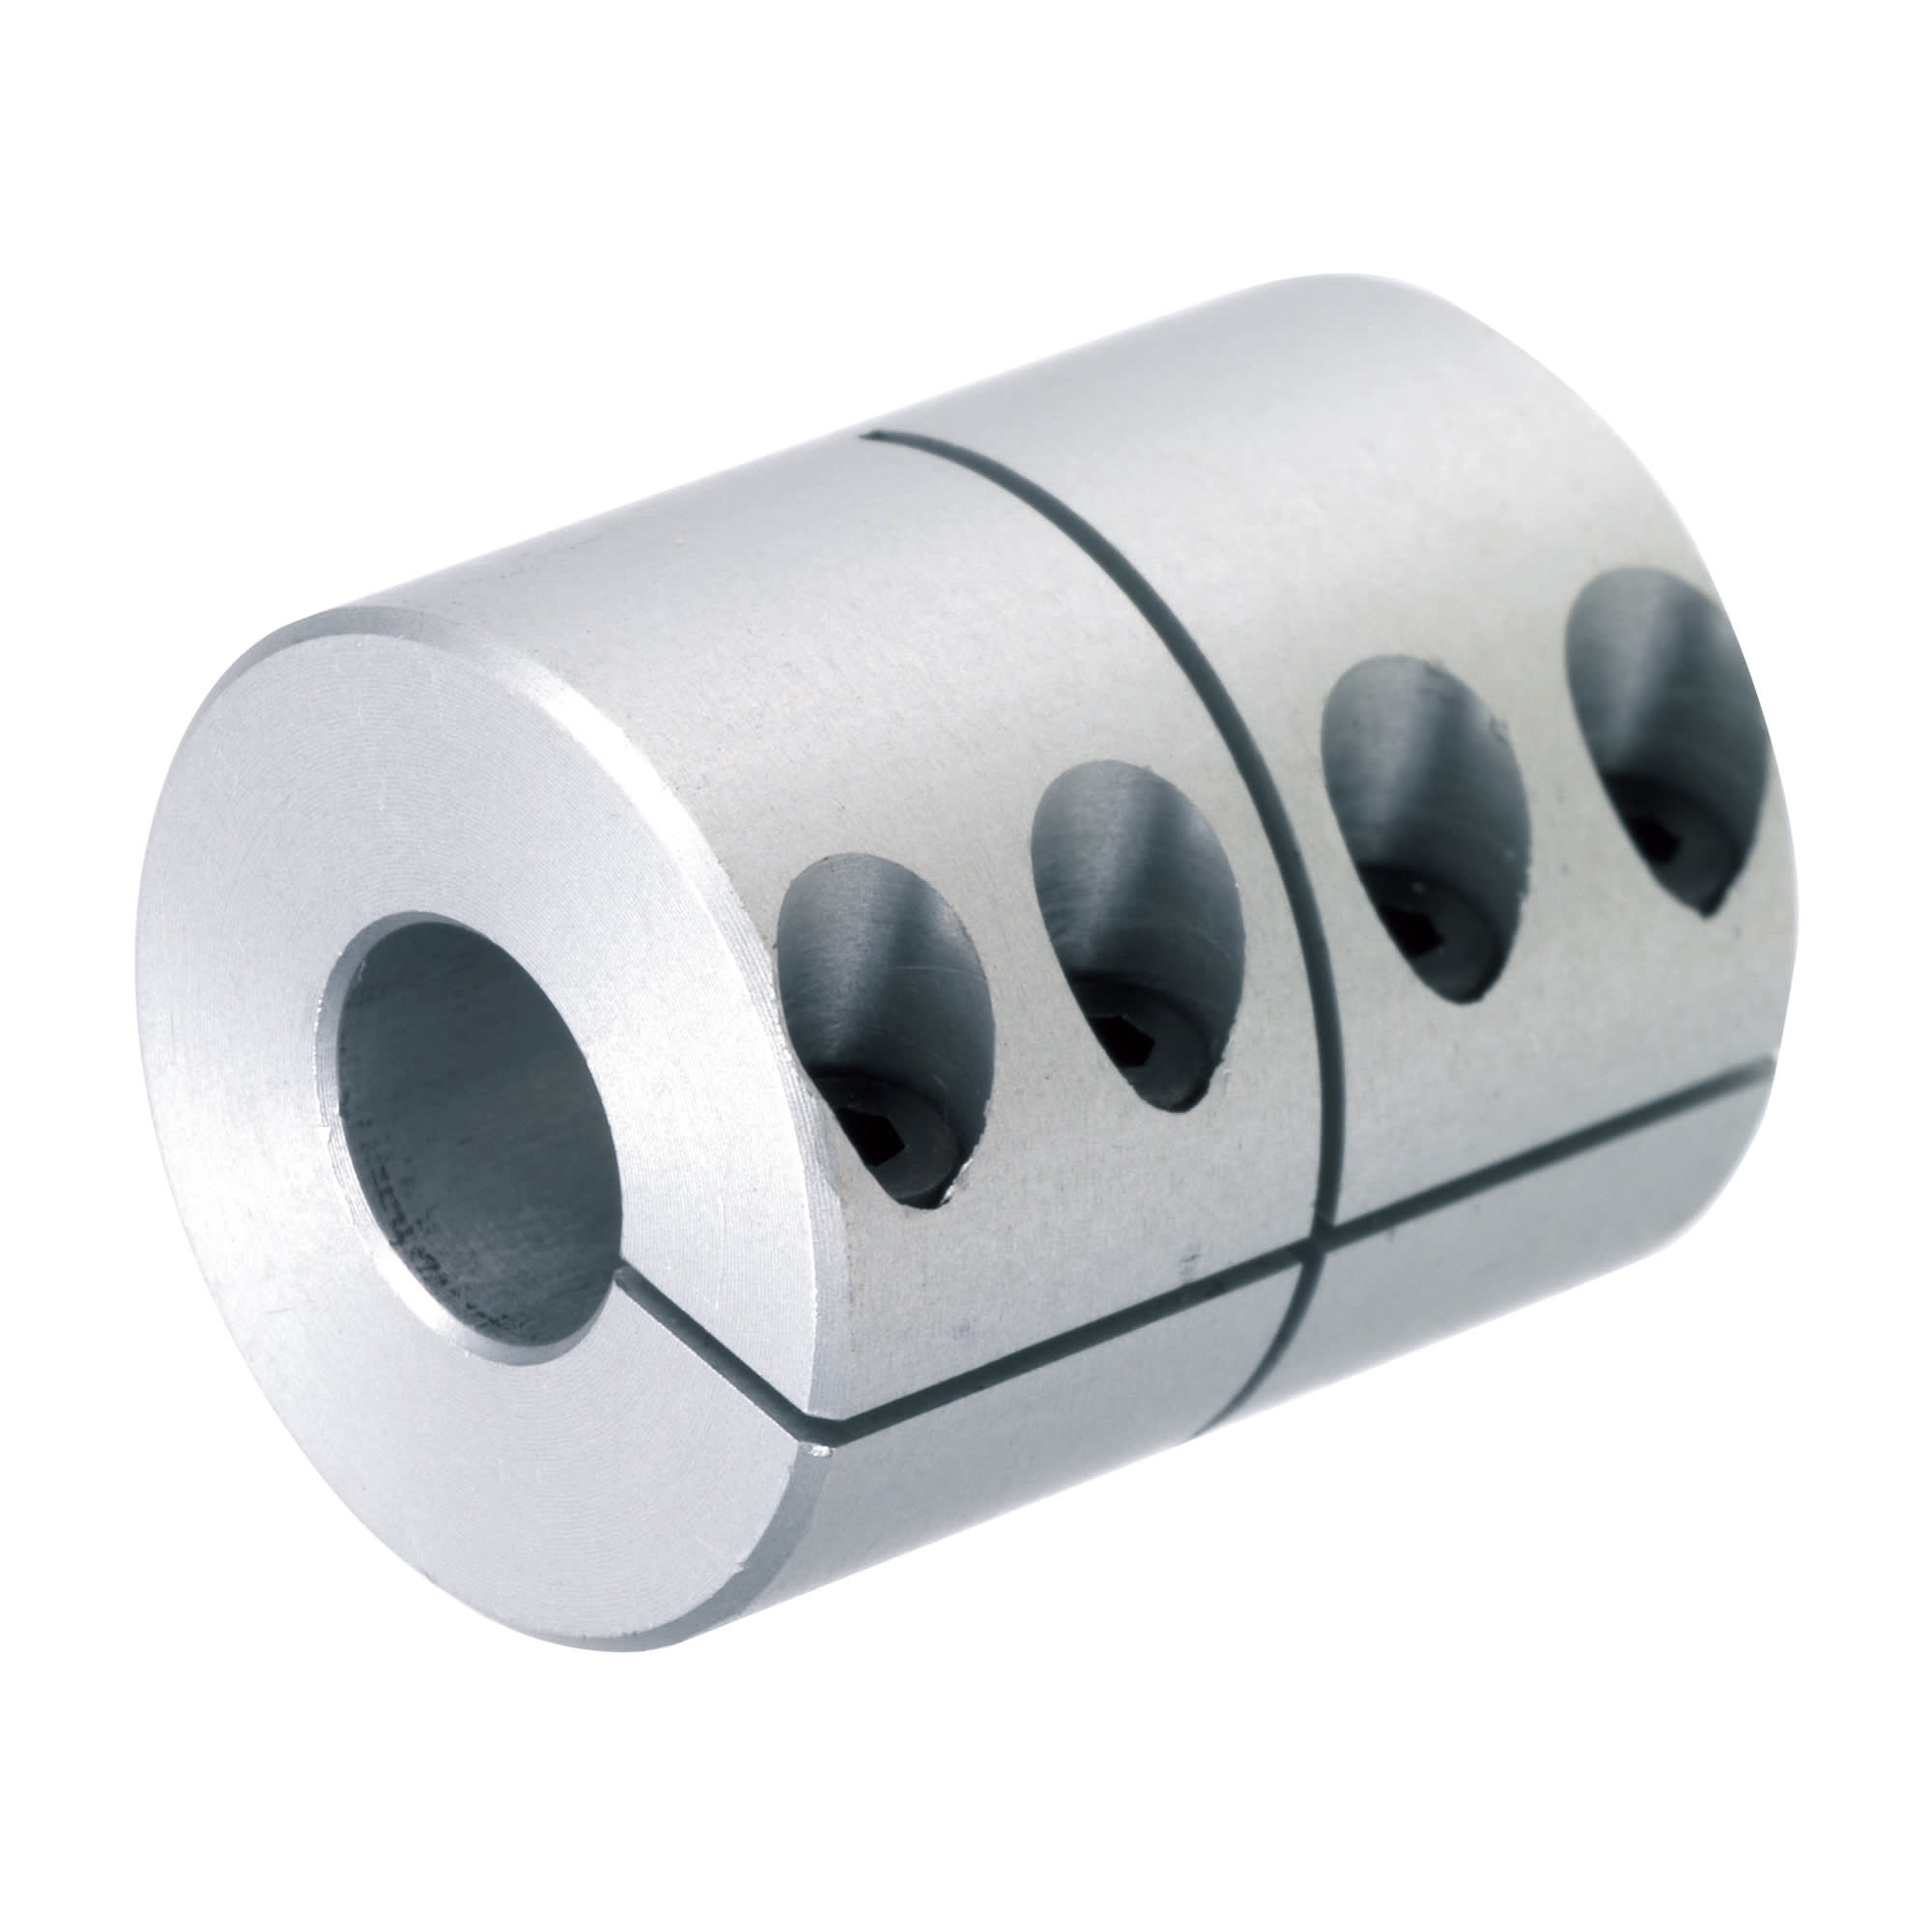 44.5 mm Length 15 mm x 11 mm Bores 6-Beam Clamp Style Ruland FCMR32-15-11-A 7075 Aluminum Beam Coupling 31.8 mm OD 